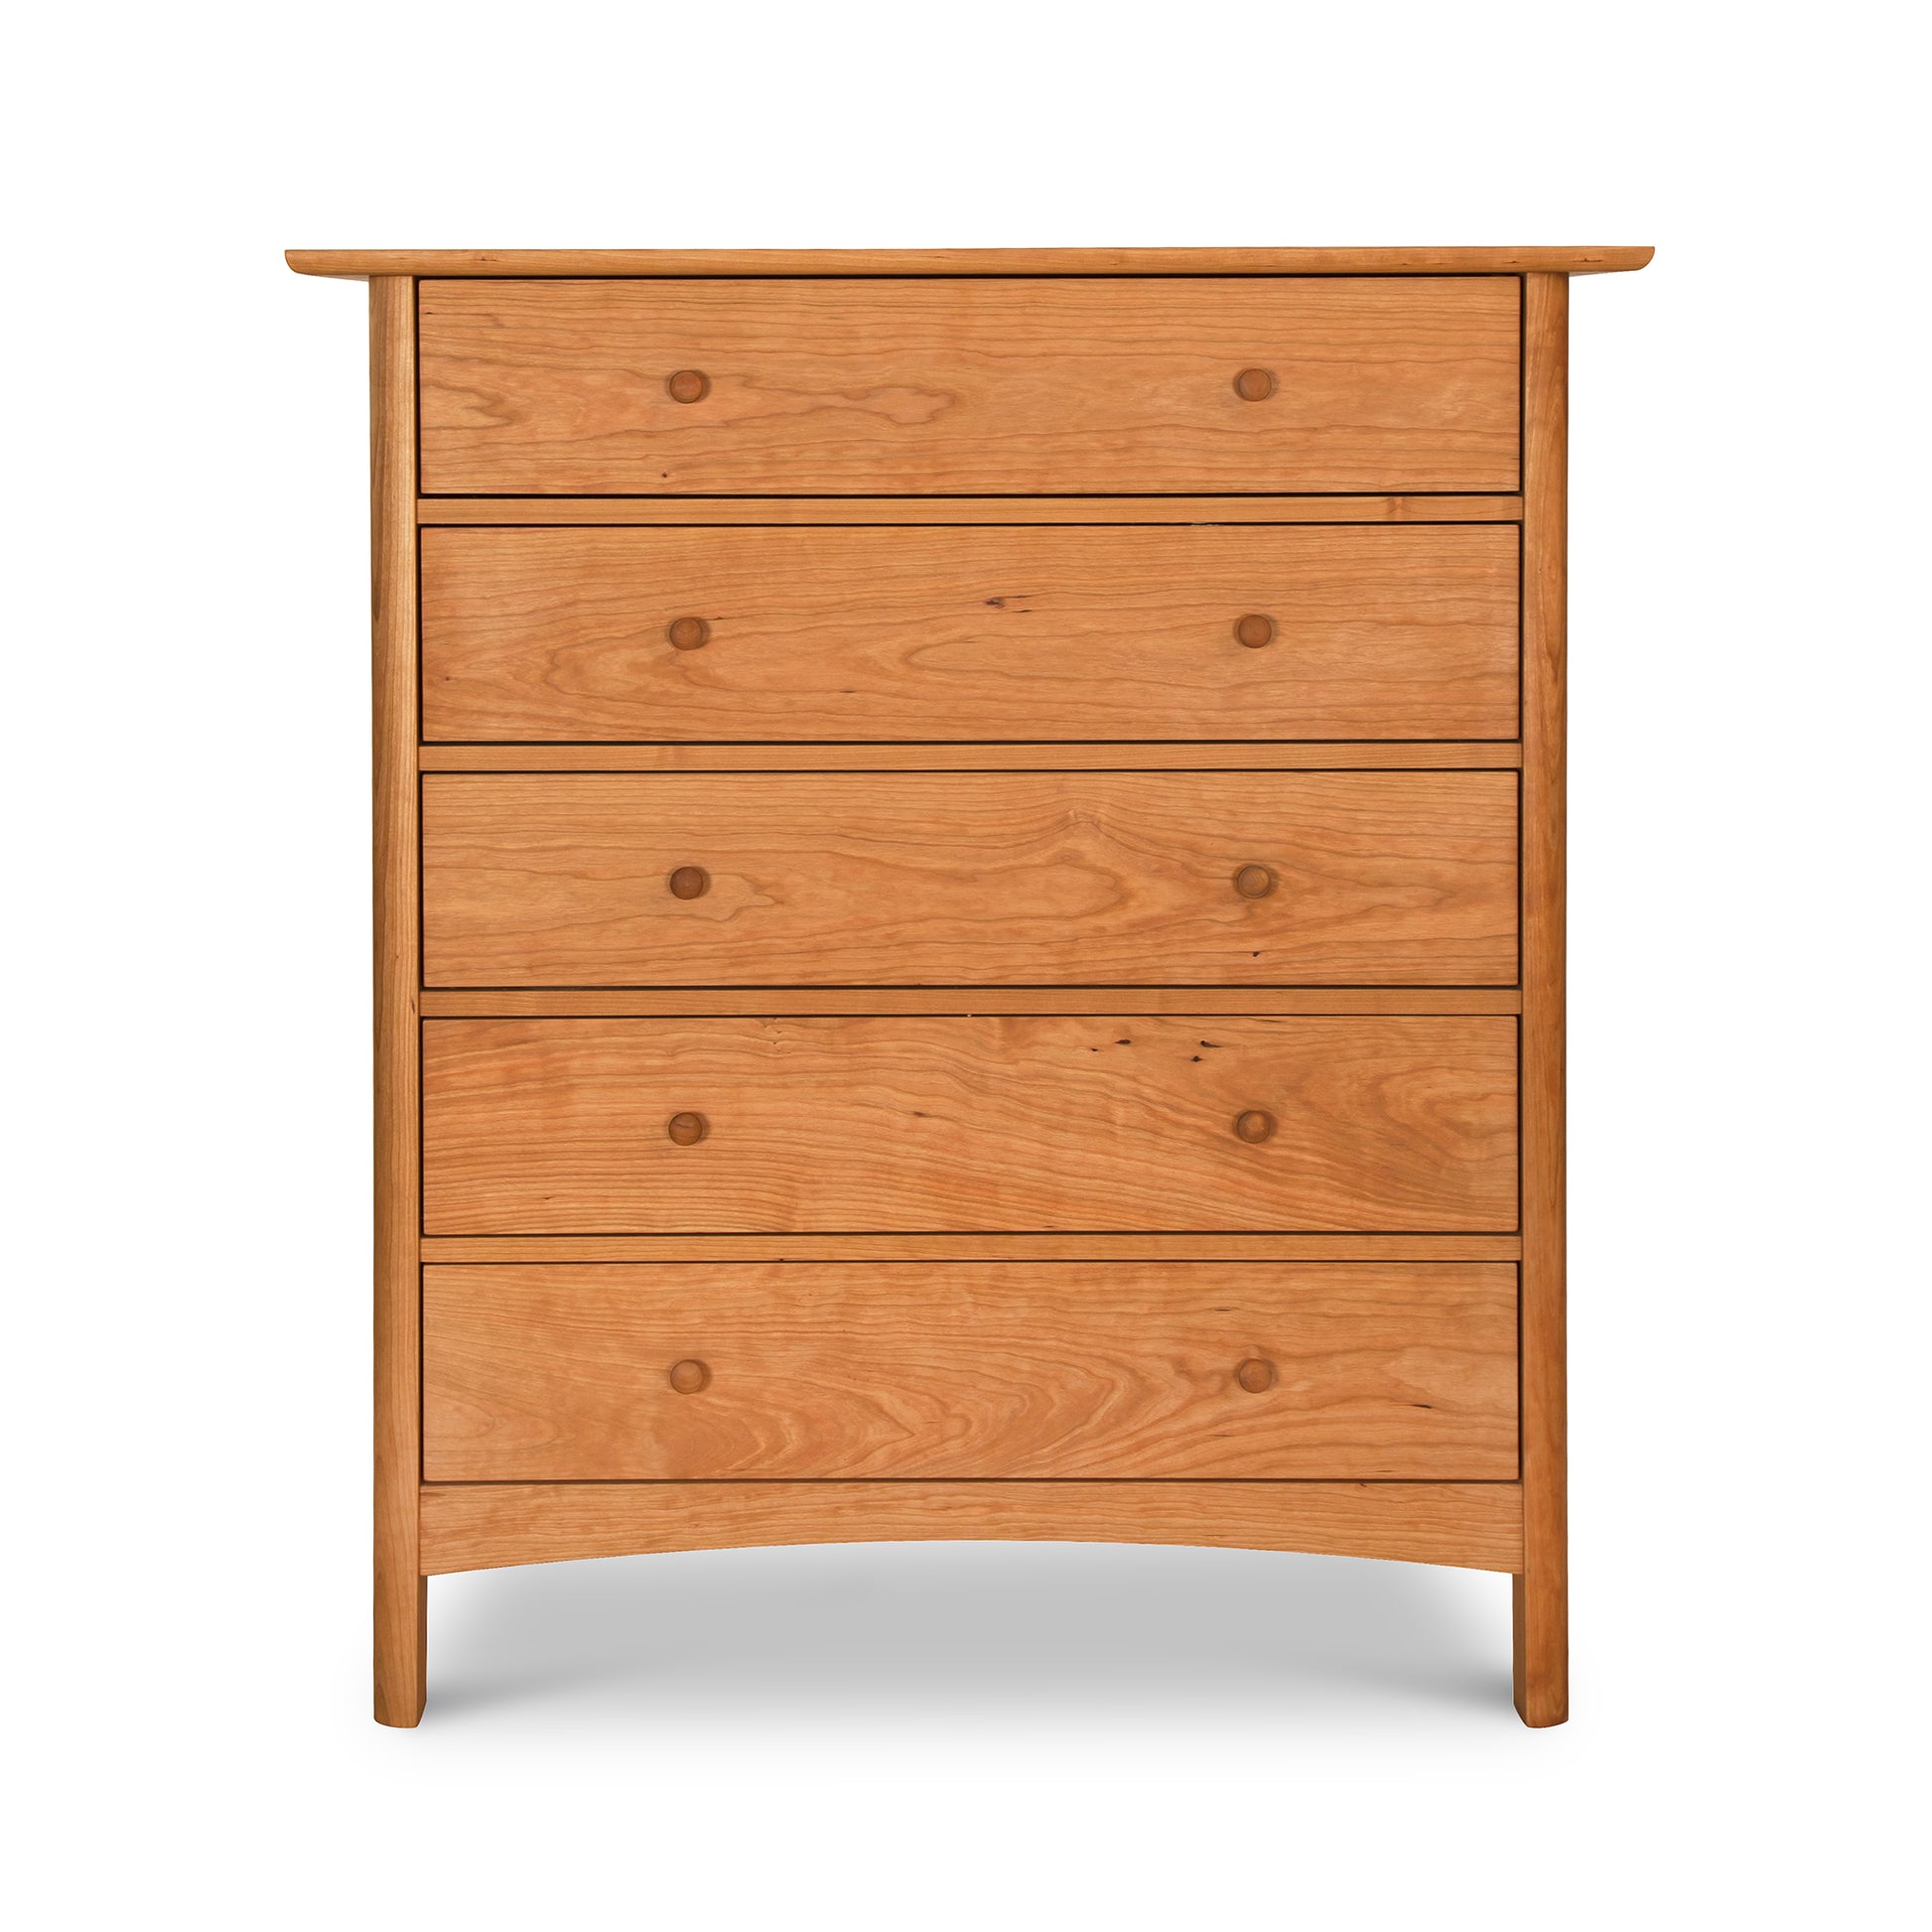 A contemporary Heartwood Shaker 5-Drawer Chest by Vermont Furniture Designs on a white background.